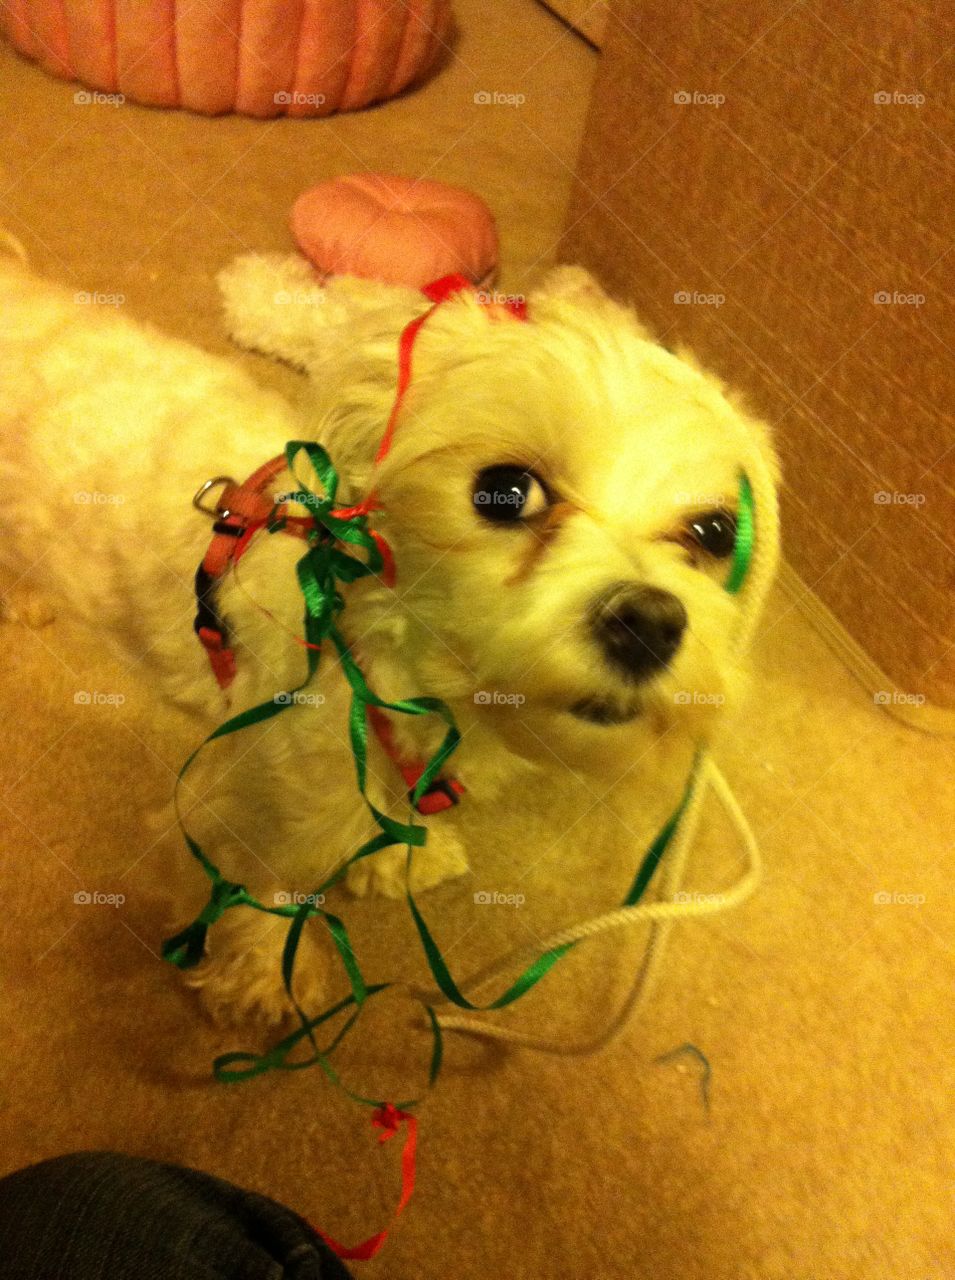 She was trying to help with the ribbon :)